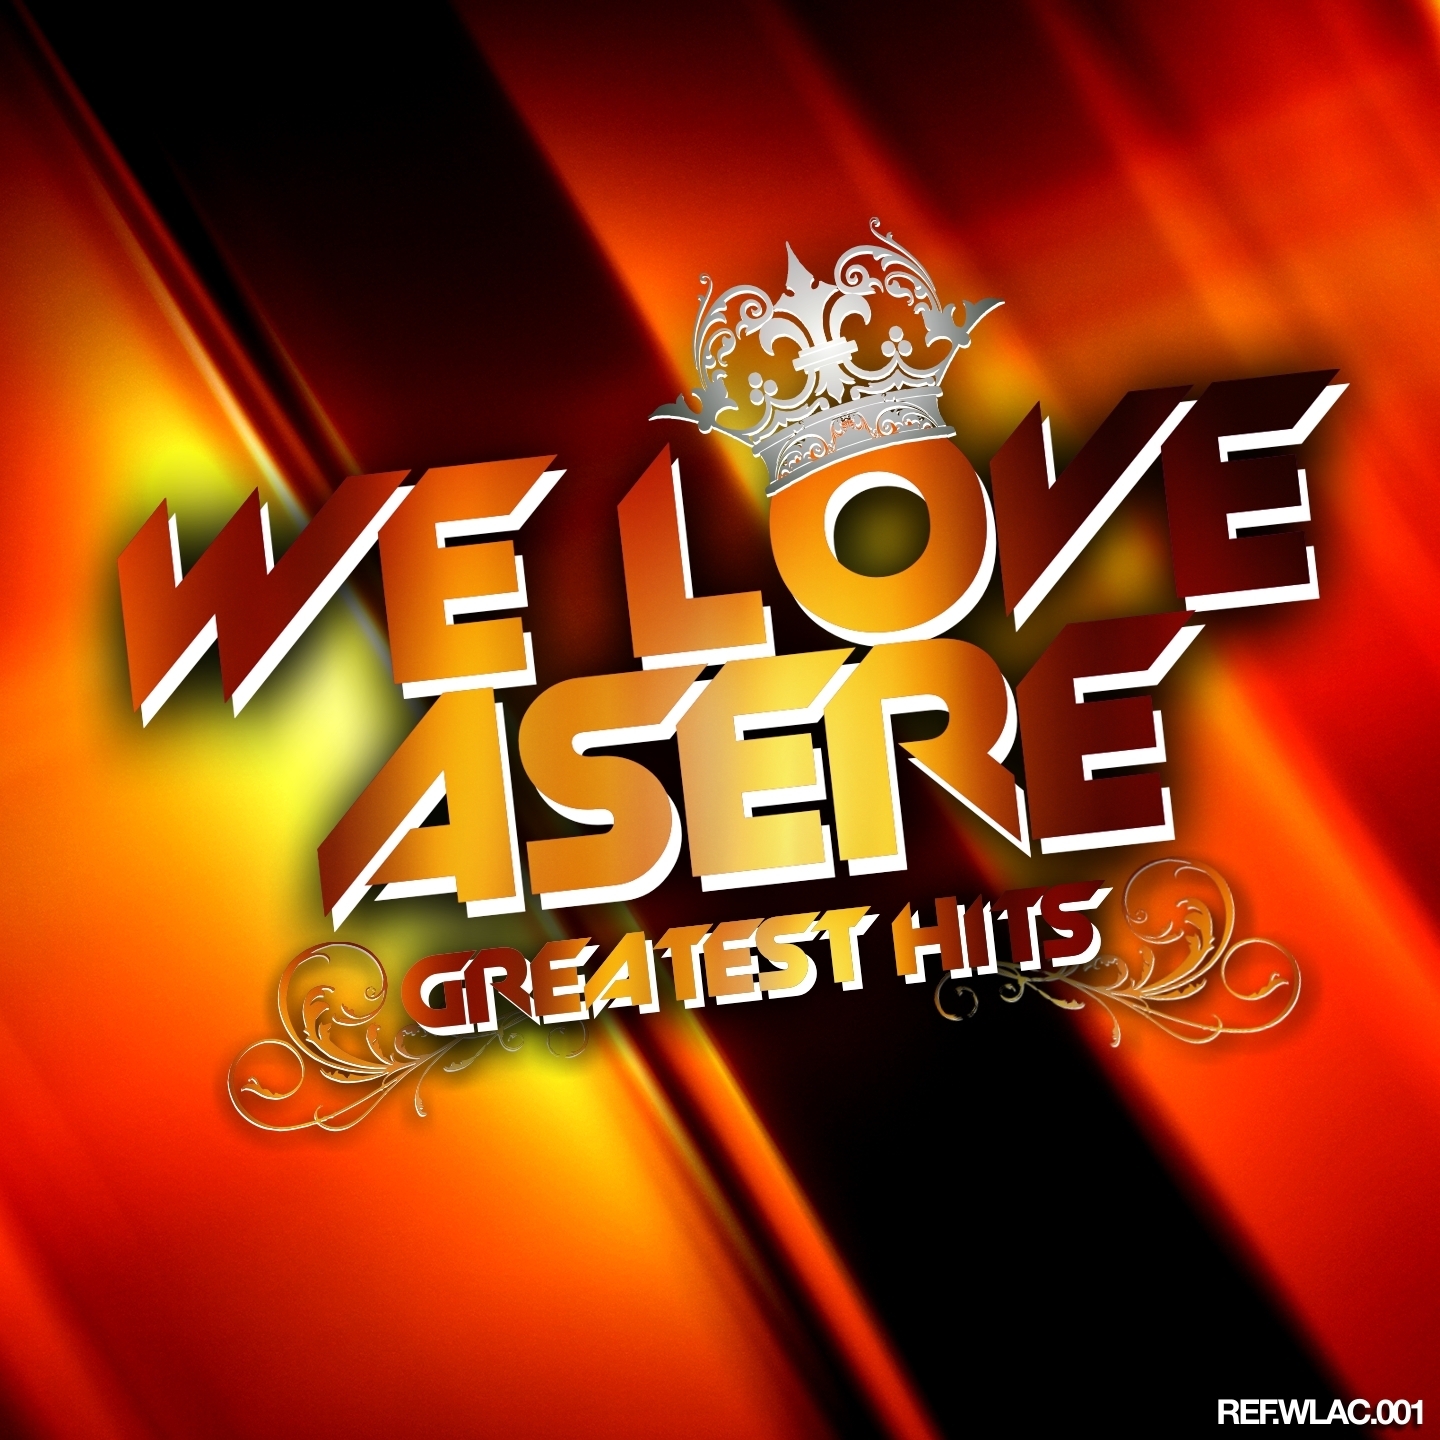 We Love Asere! Greatest Hits